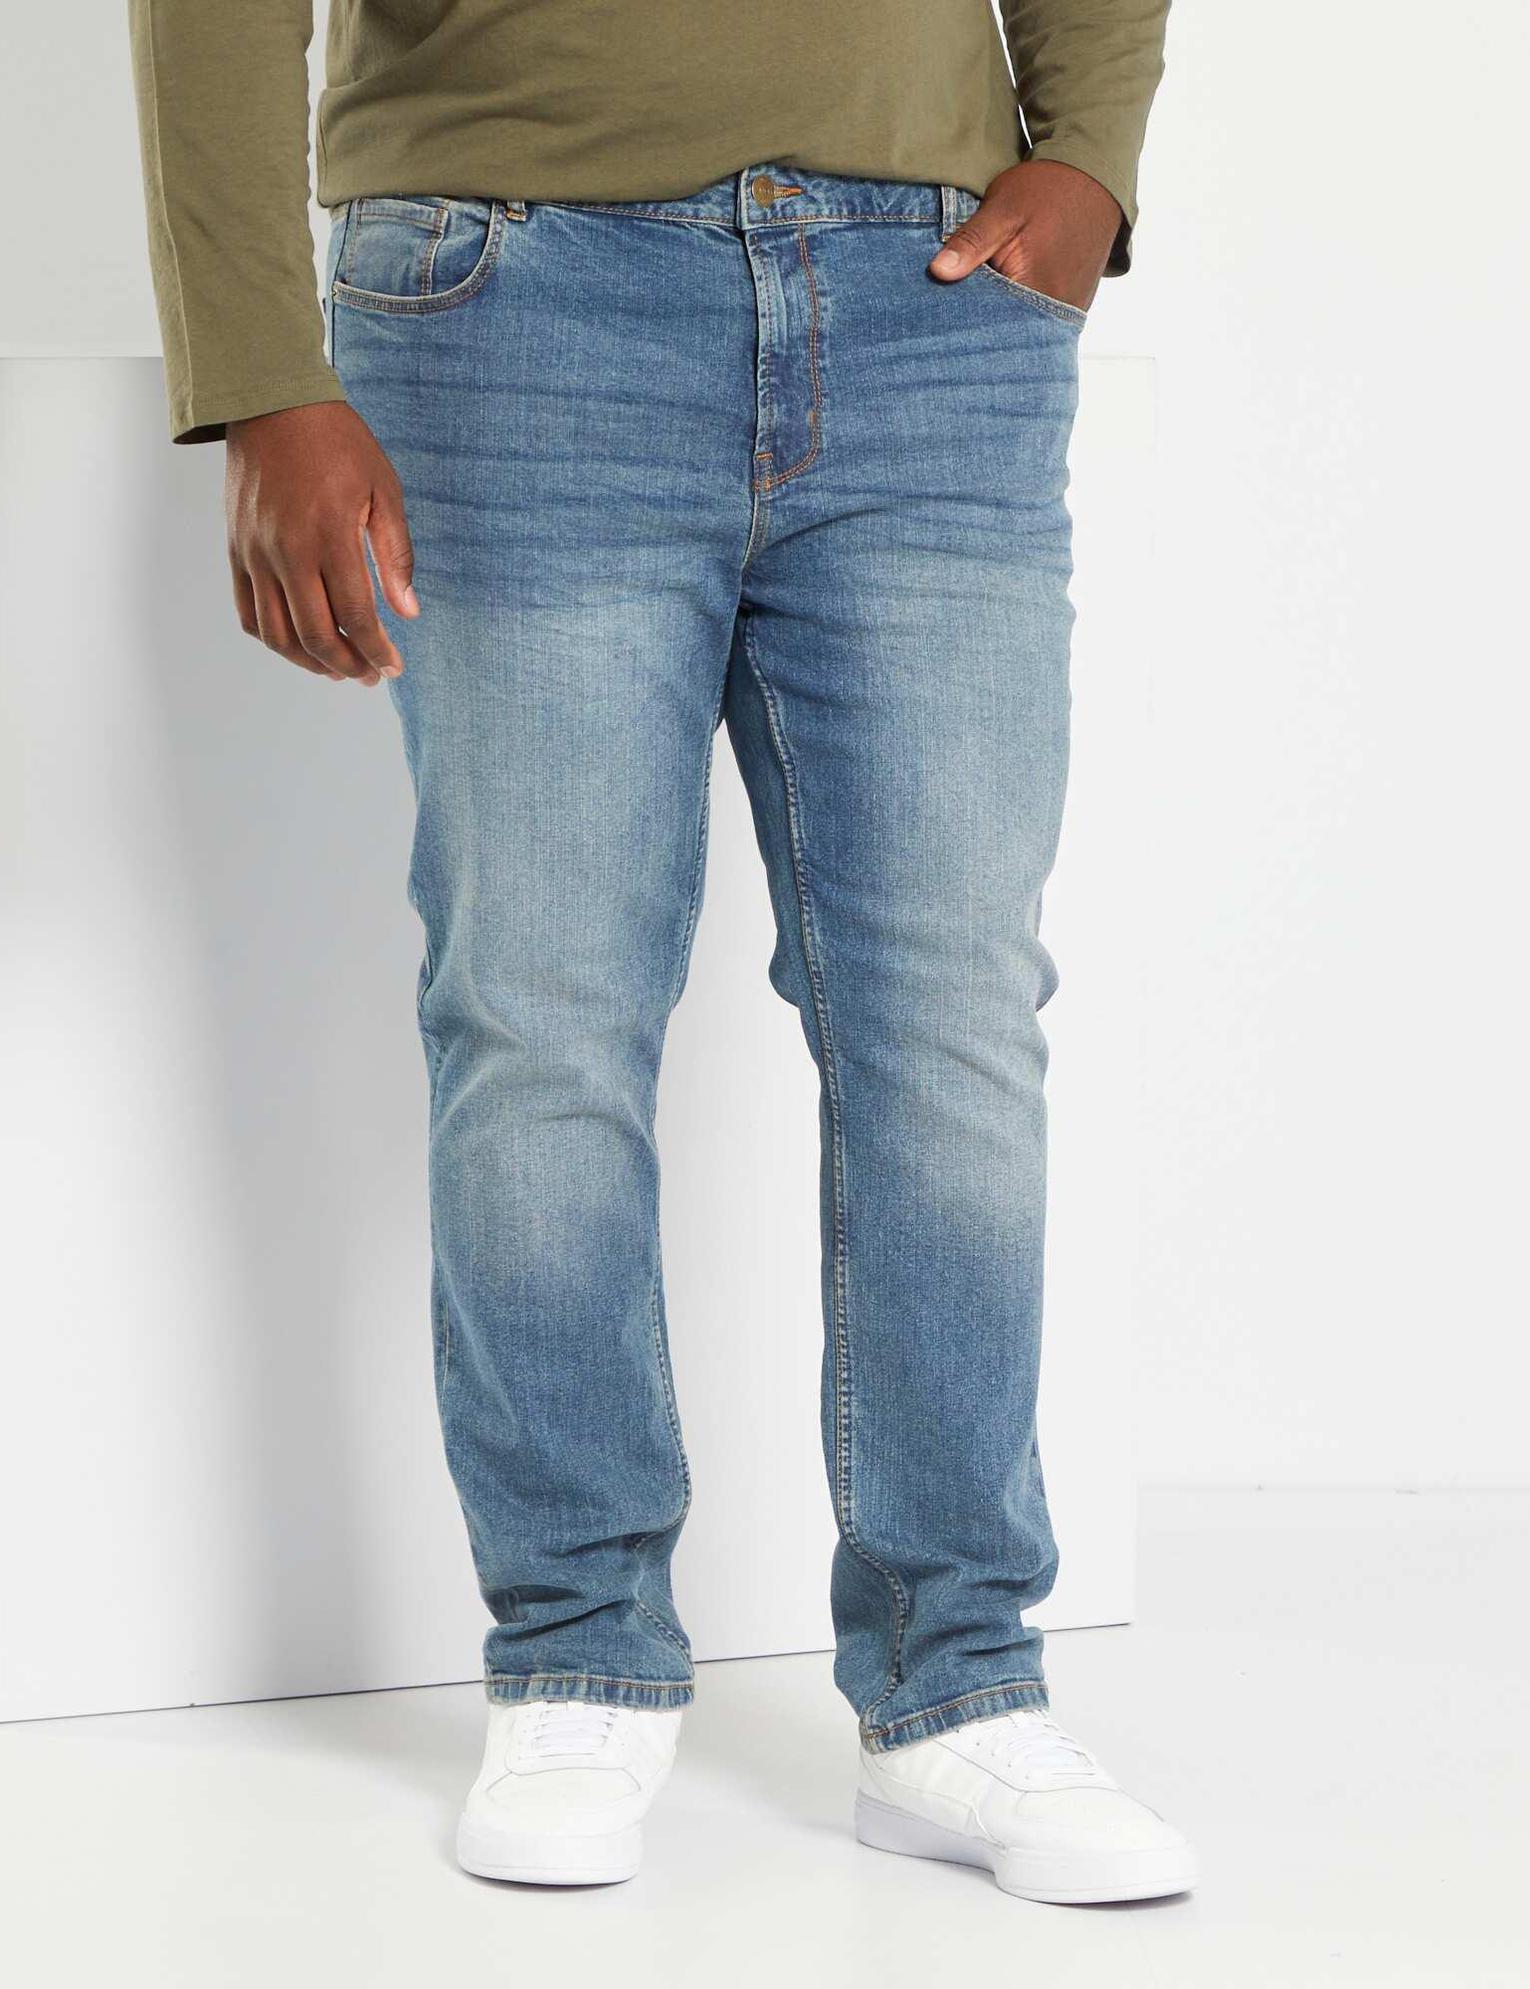 fitted jeans online